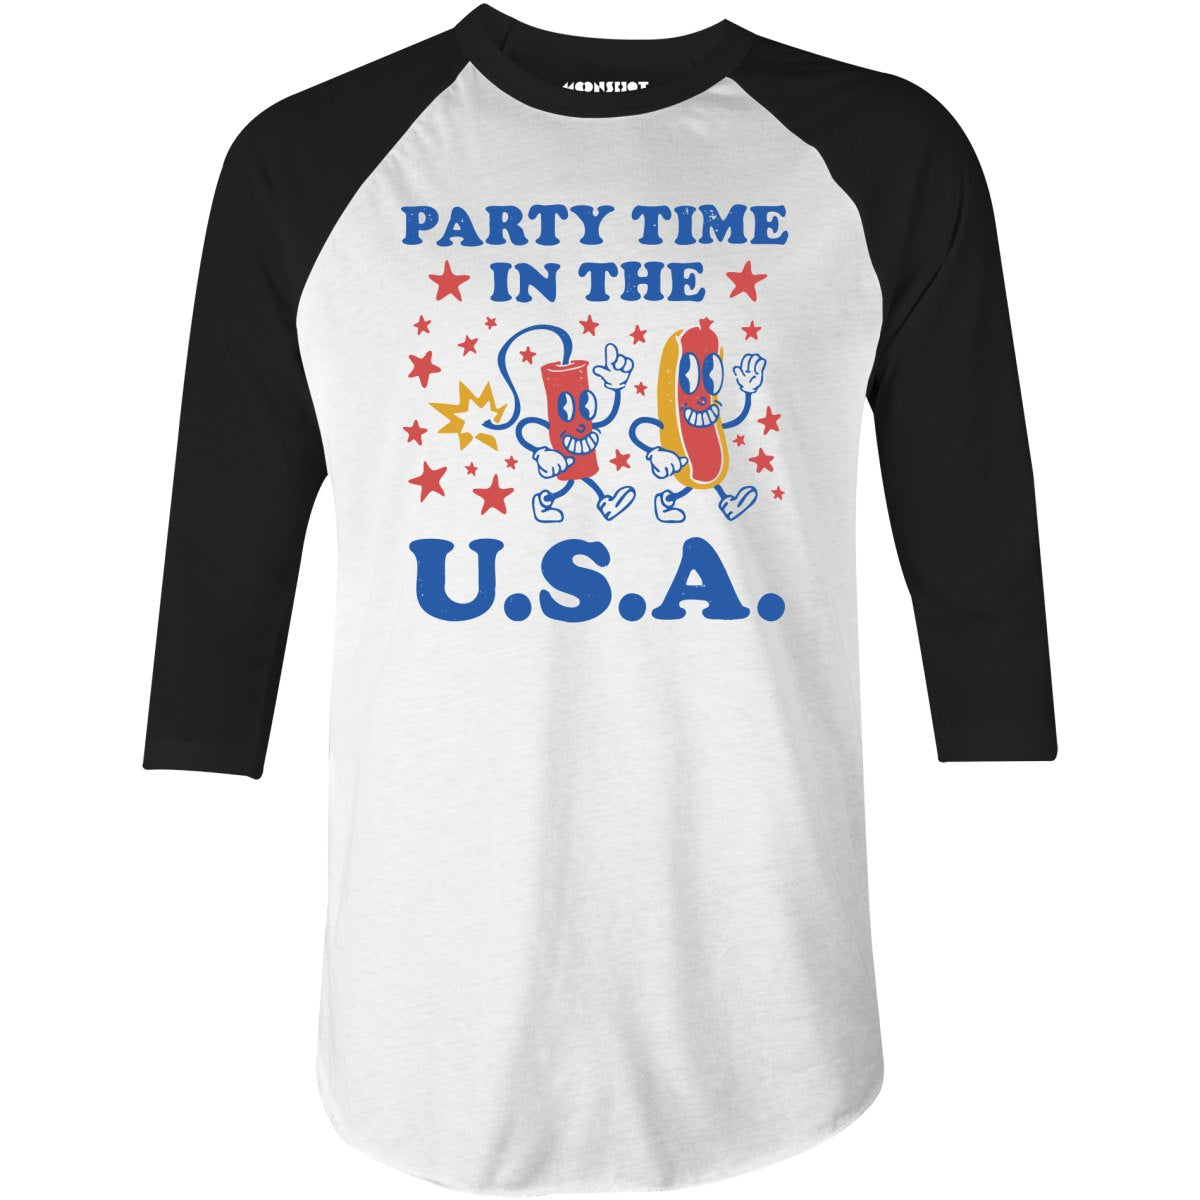 Party Time in The U.S.A. - 3/4 Sleeve Raglan T-Shirt